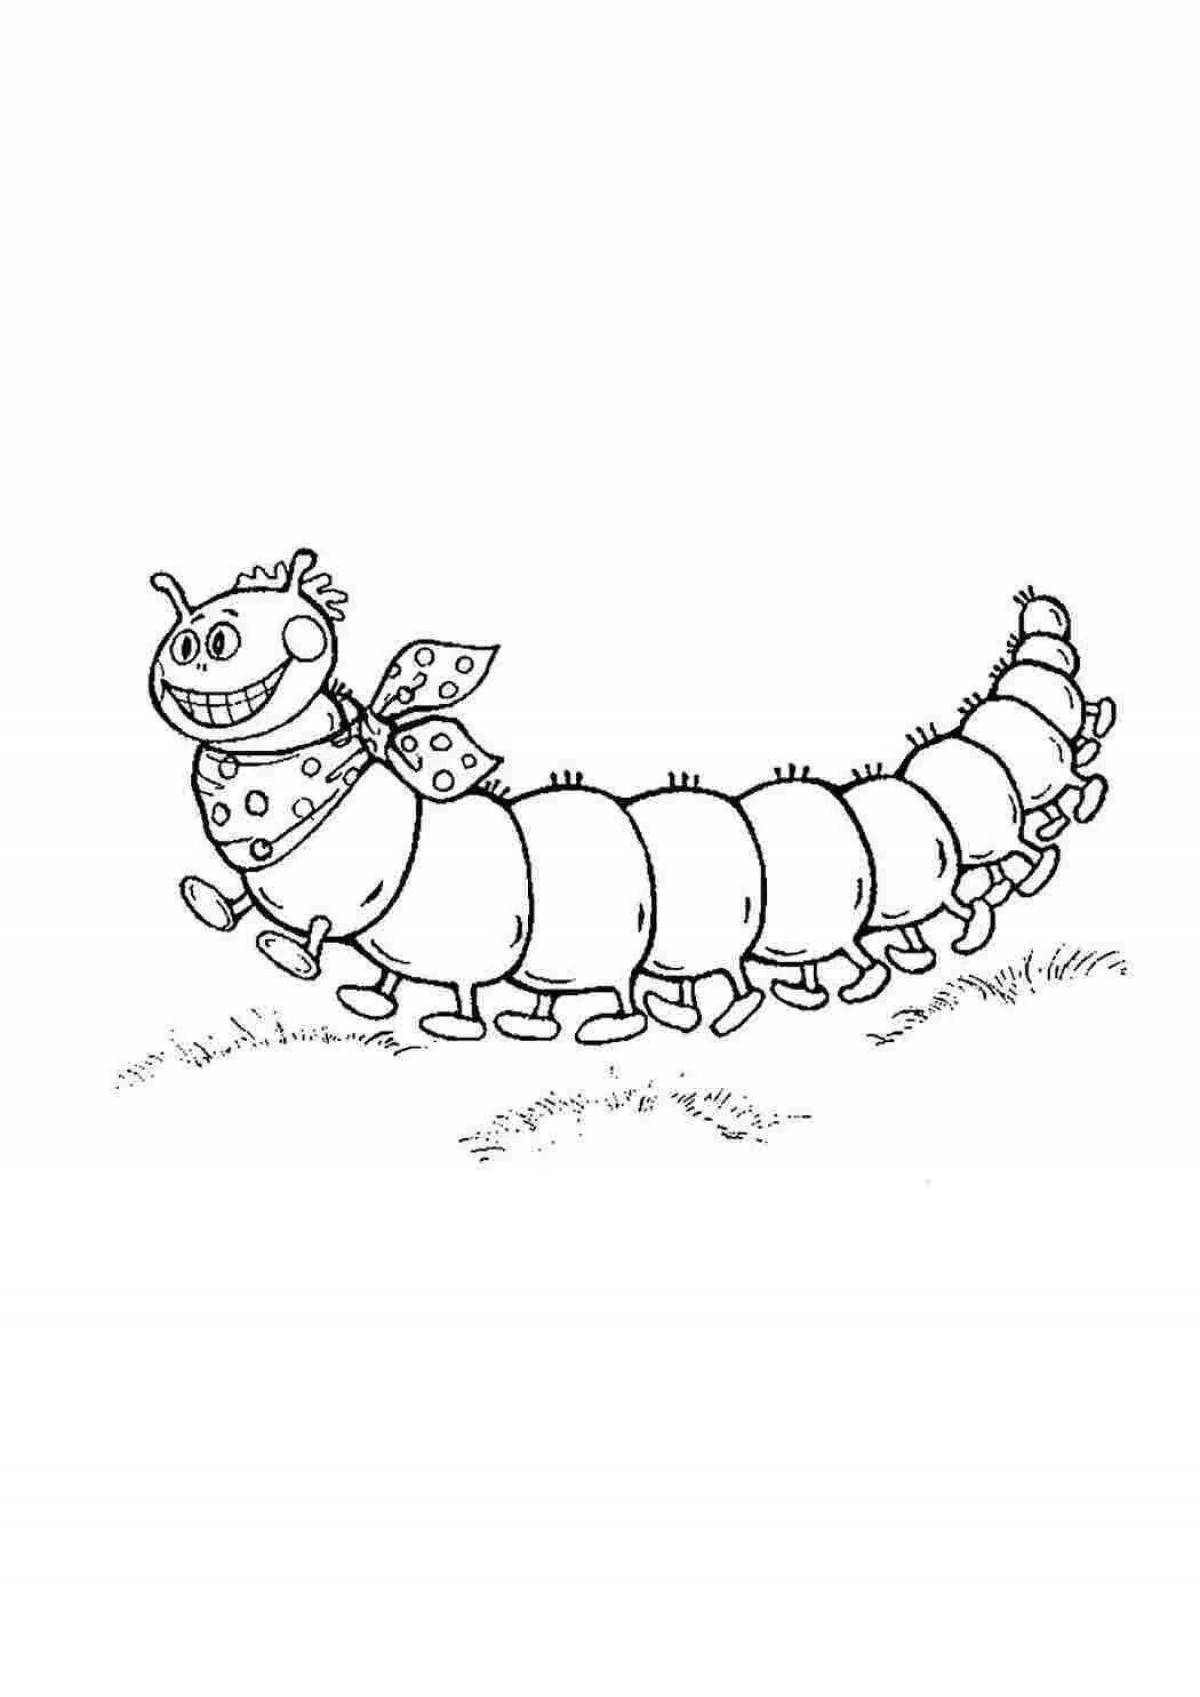 Funny centipede coloring book for kids